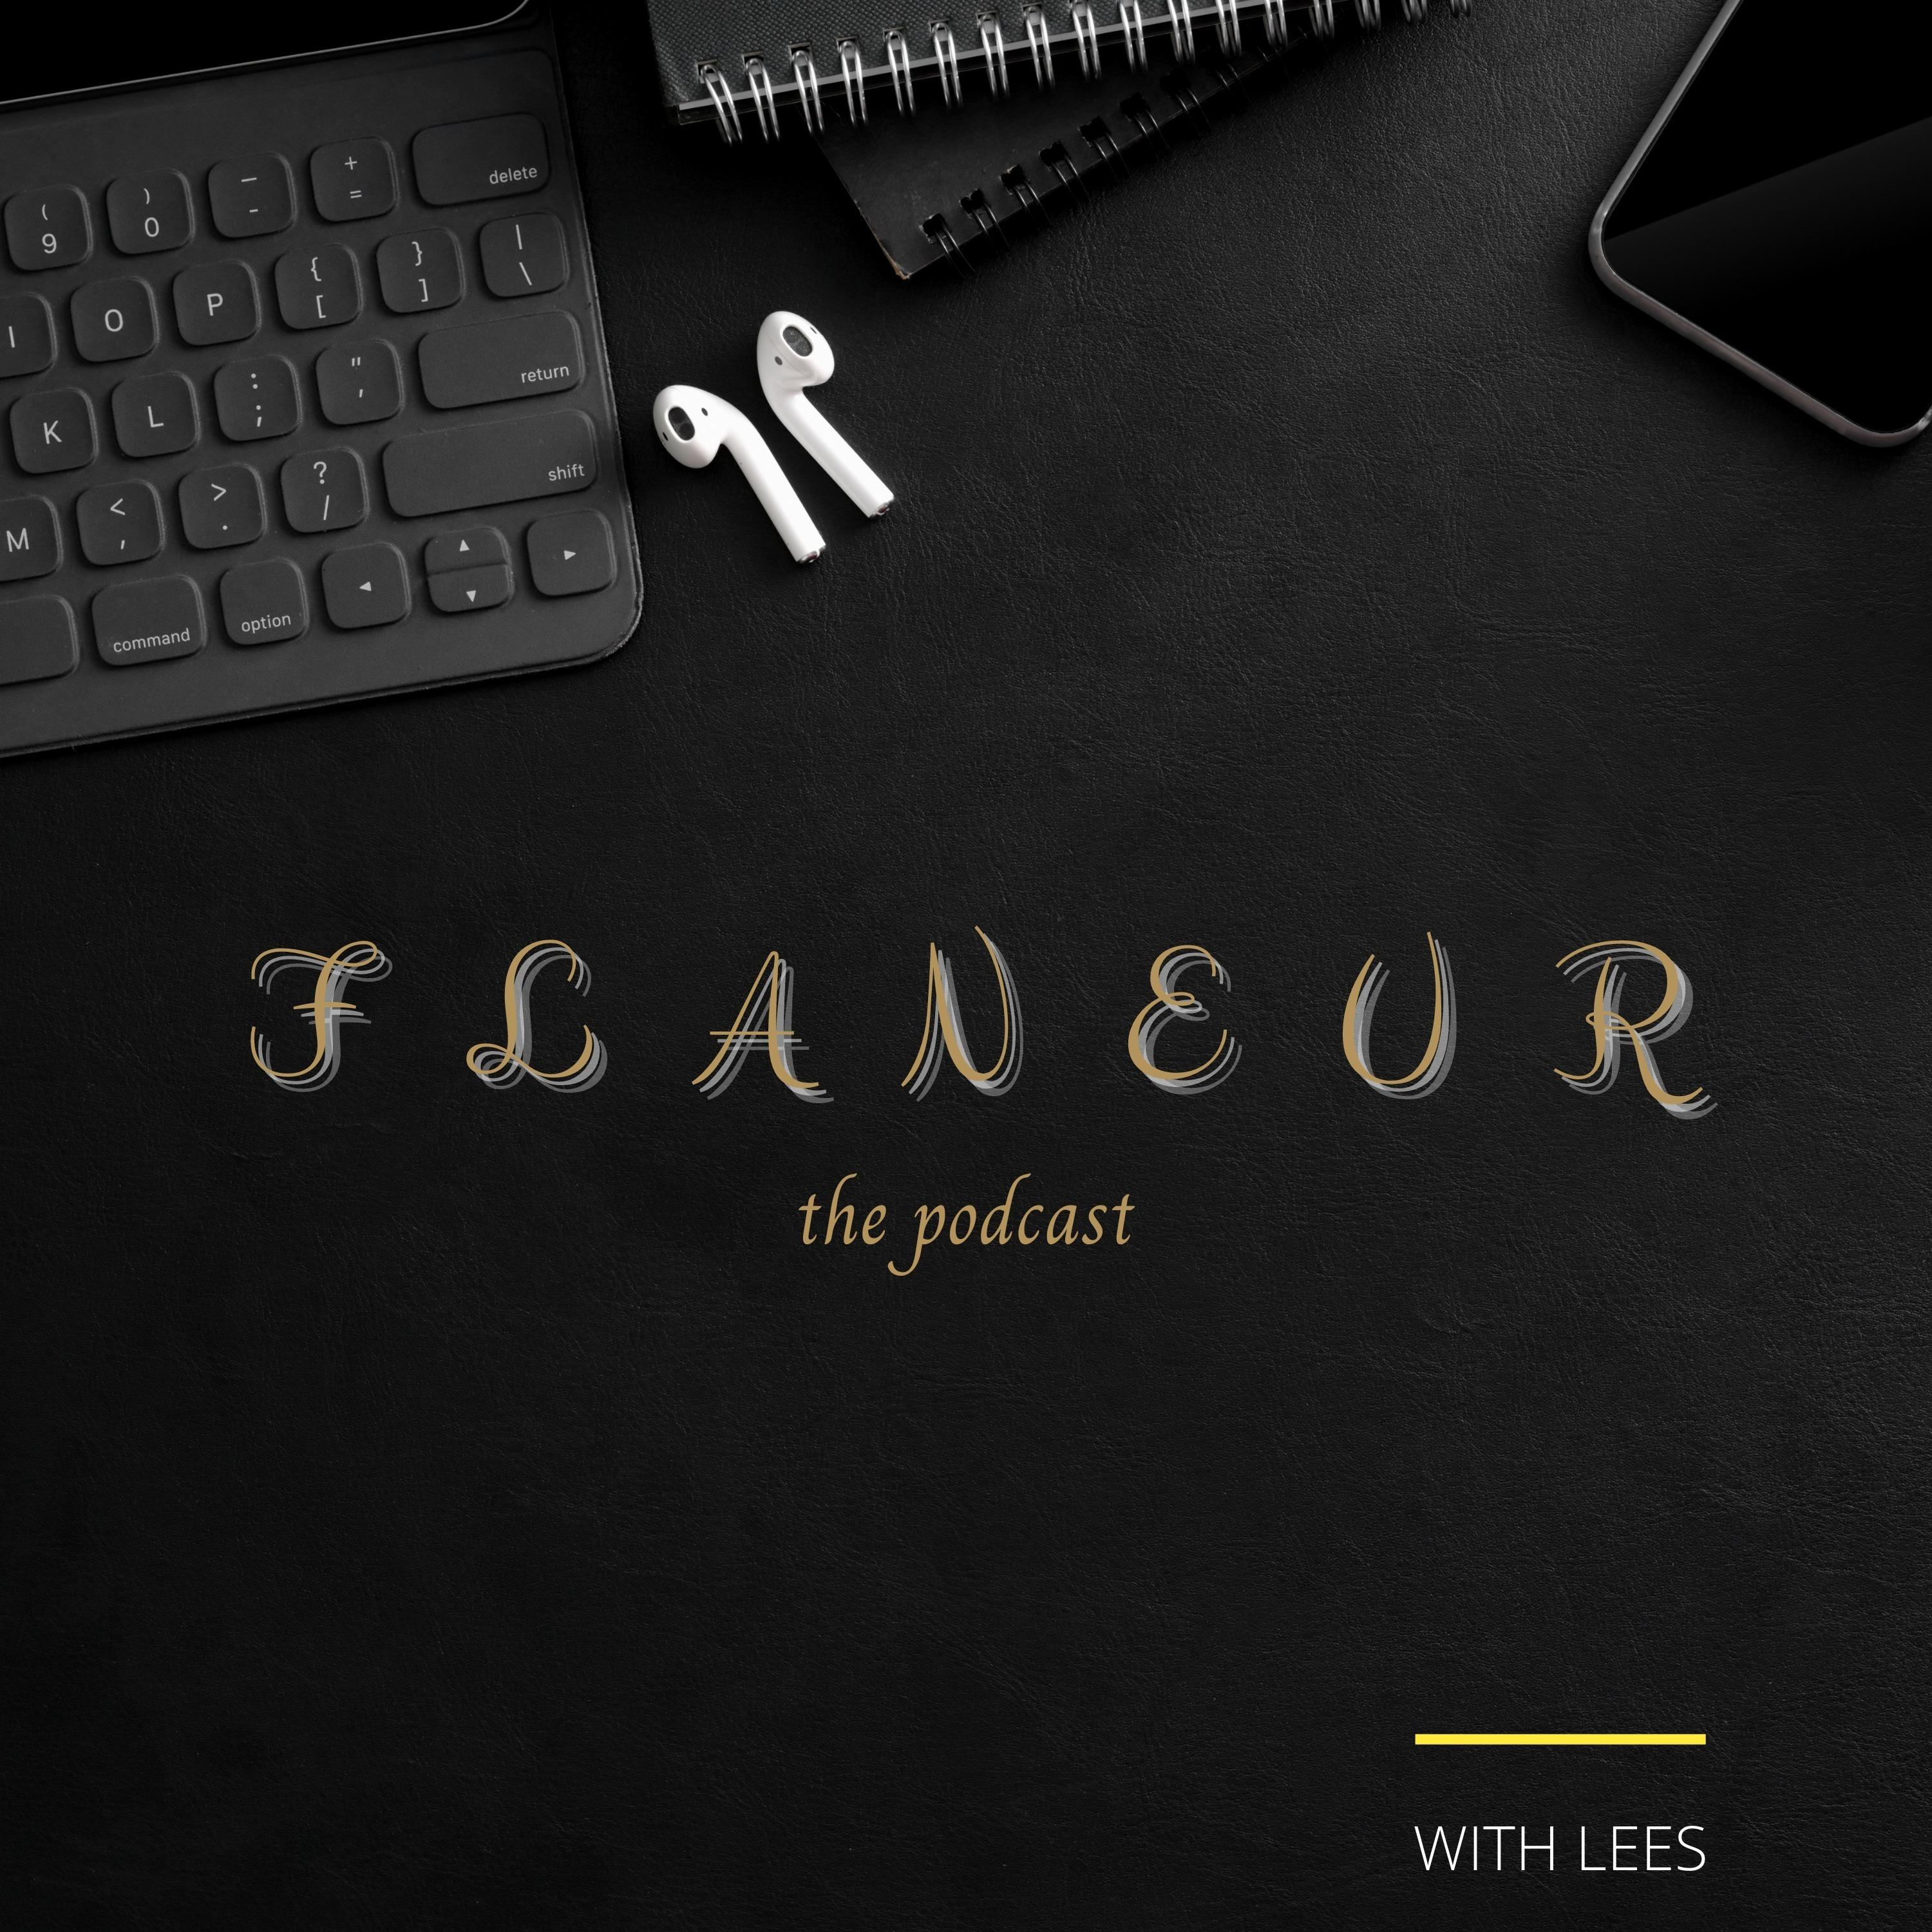 Flaneurthepodcast